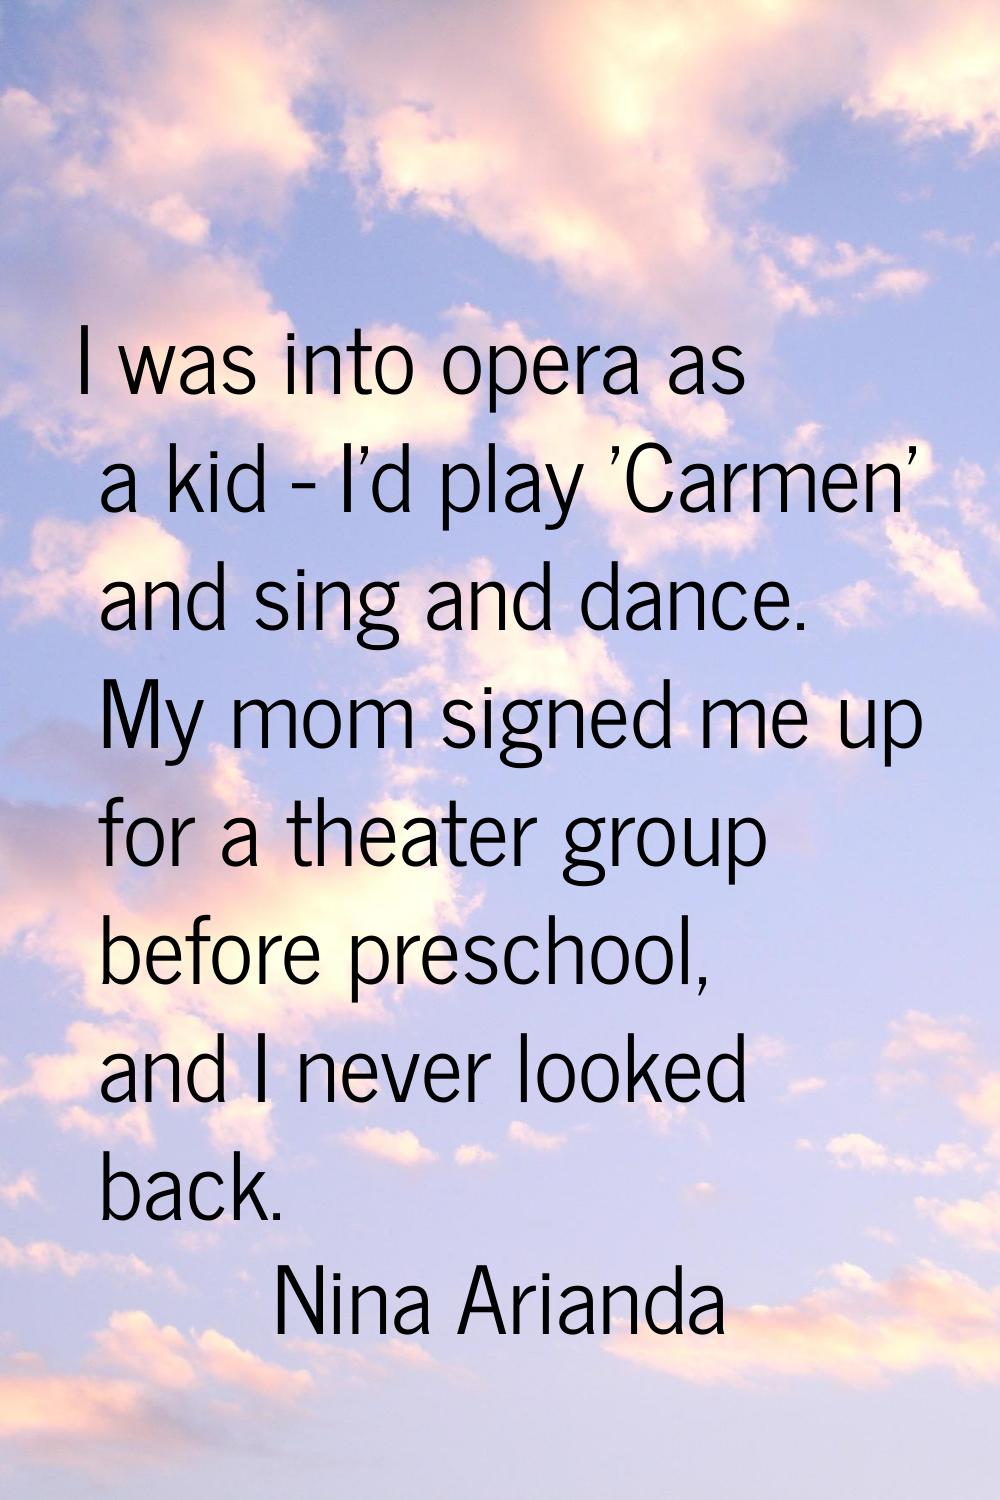 I was into opera as a kid - I'd play 'Carmen' and sing and dance. My mom signed me up for a theater